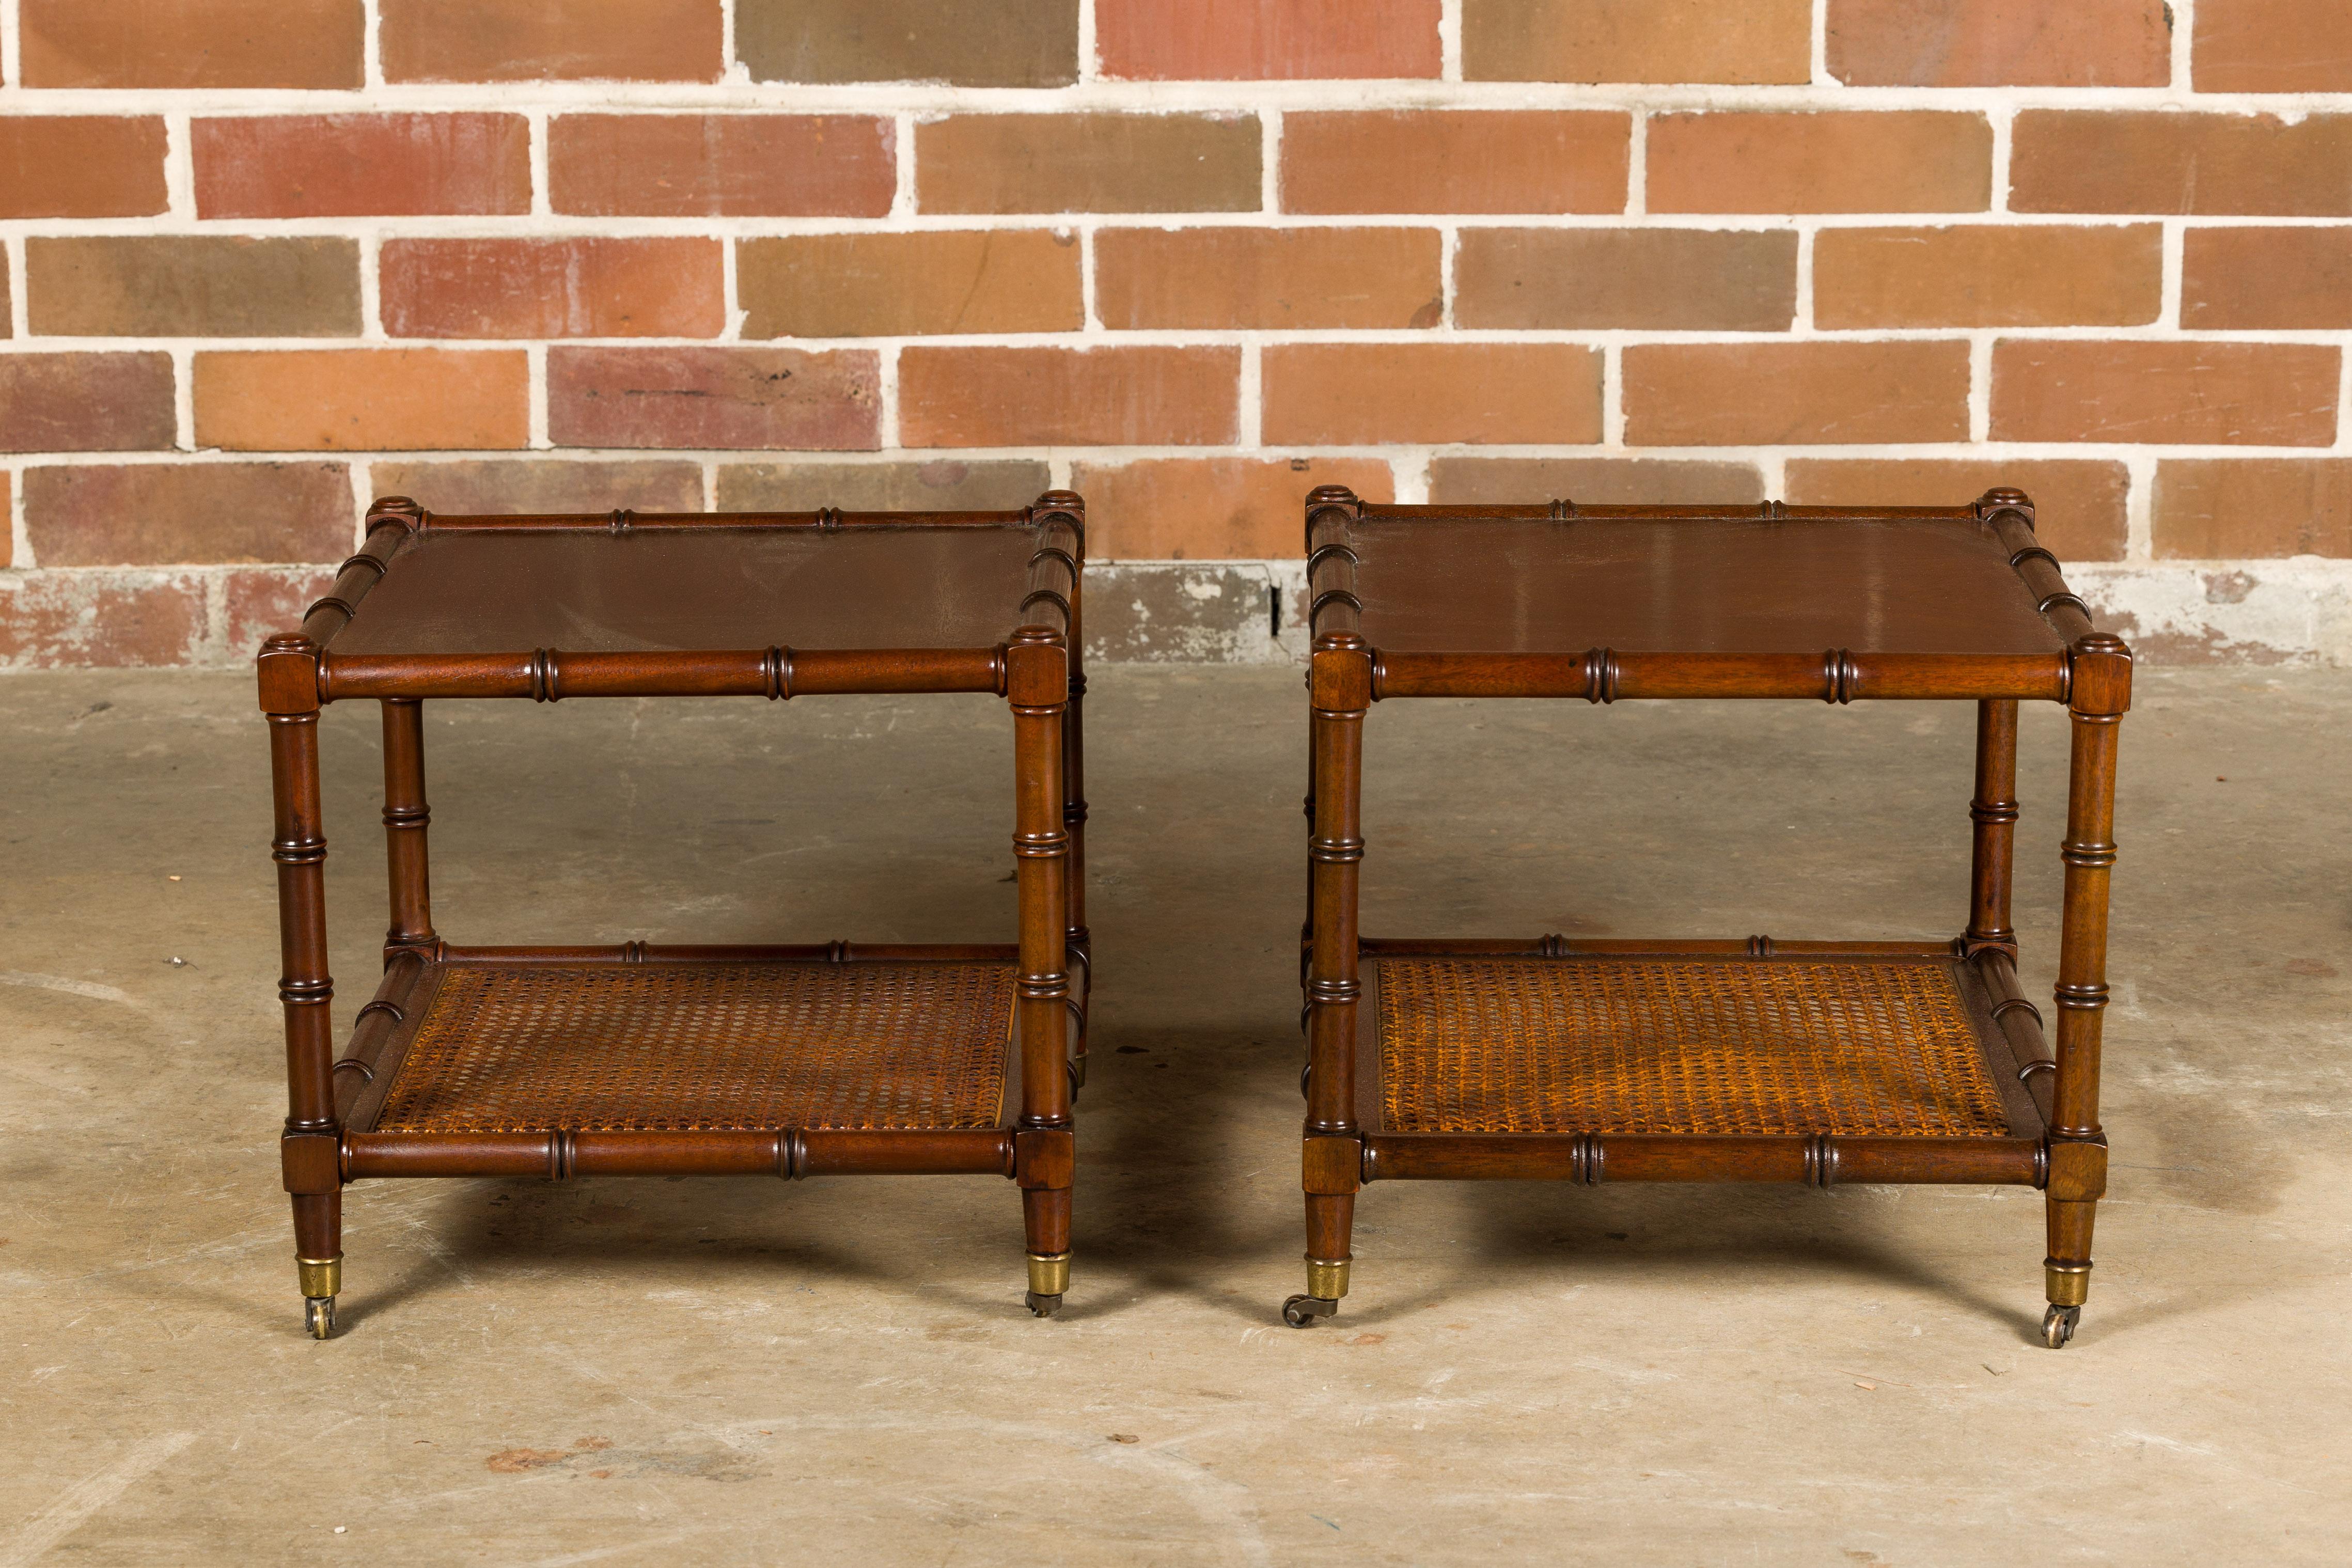 Carved English Midcentury Walnut, Faux Bamboo and Cane Low Side Tables on Casters, Pair For Sale